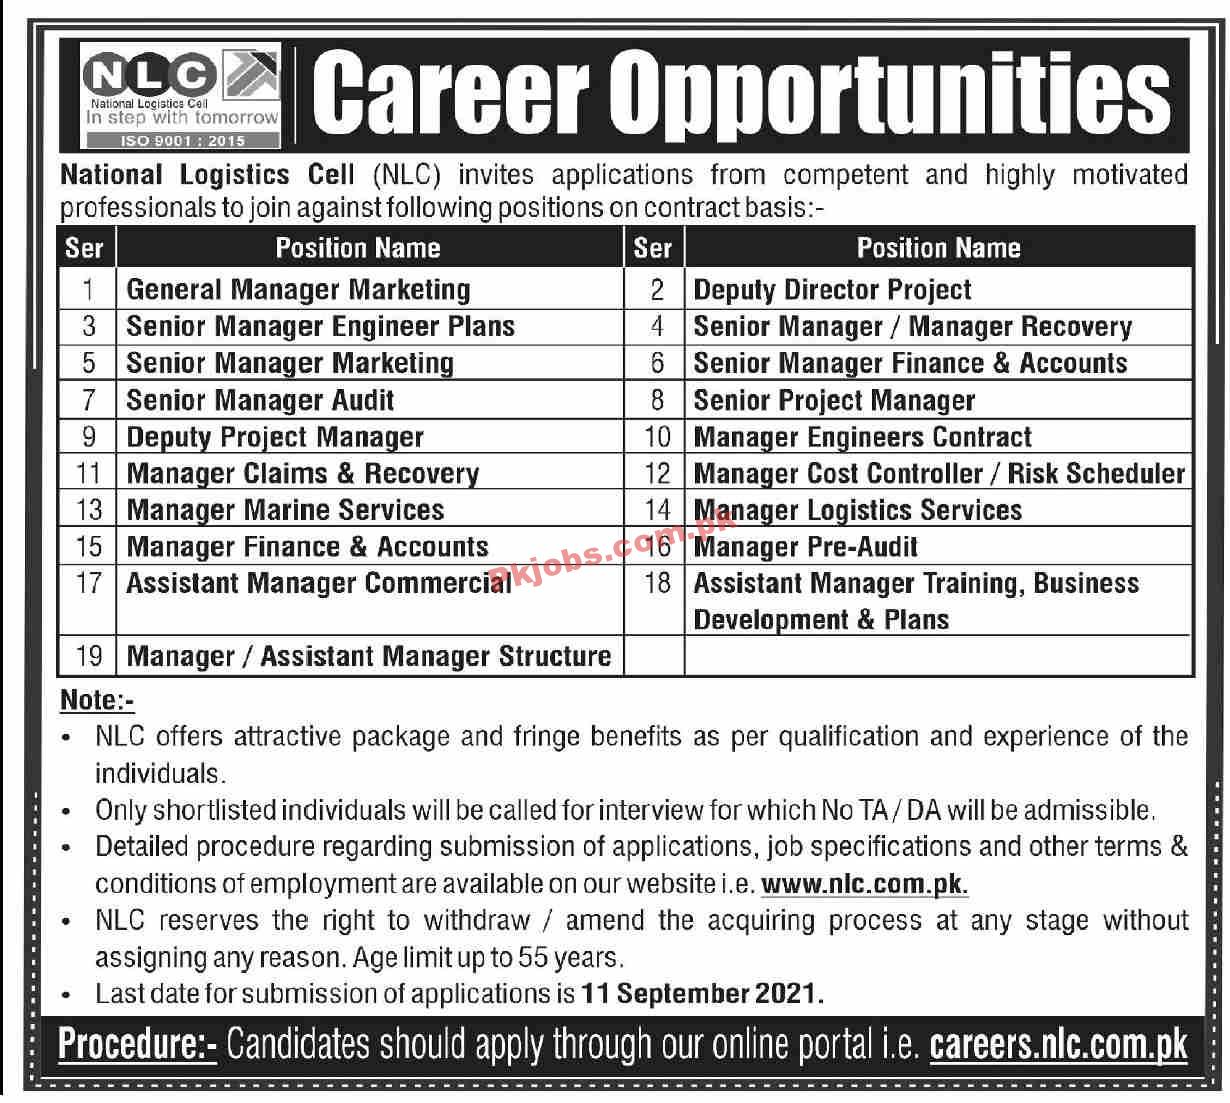 Jobs in National Logistic Cell (NLC)